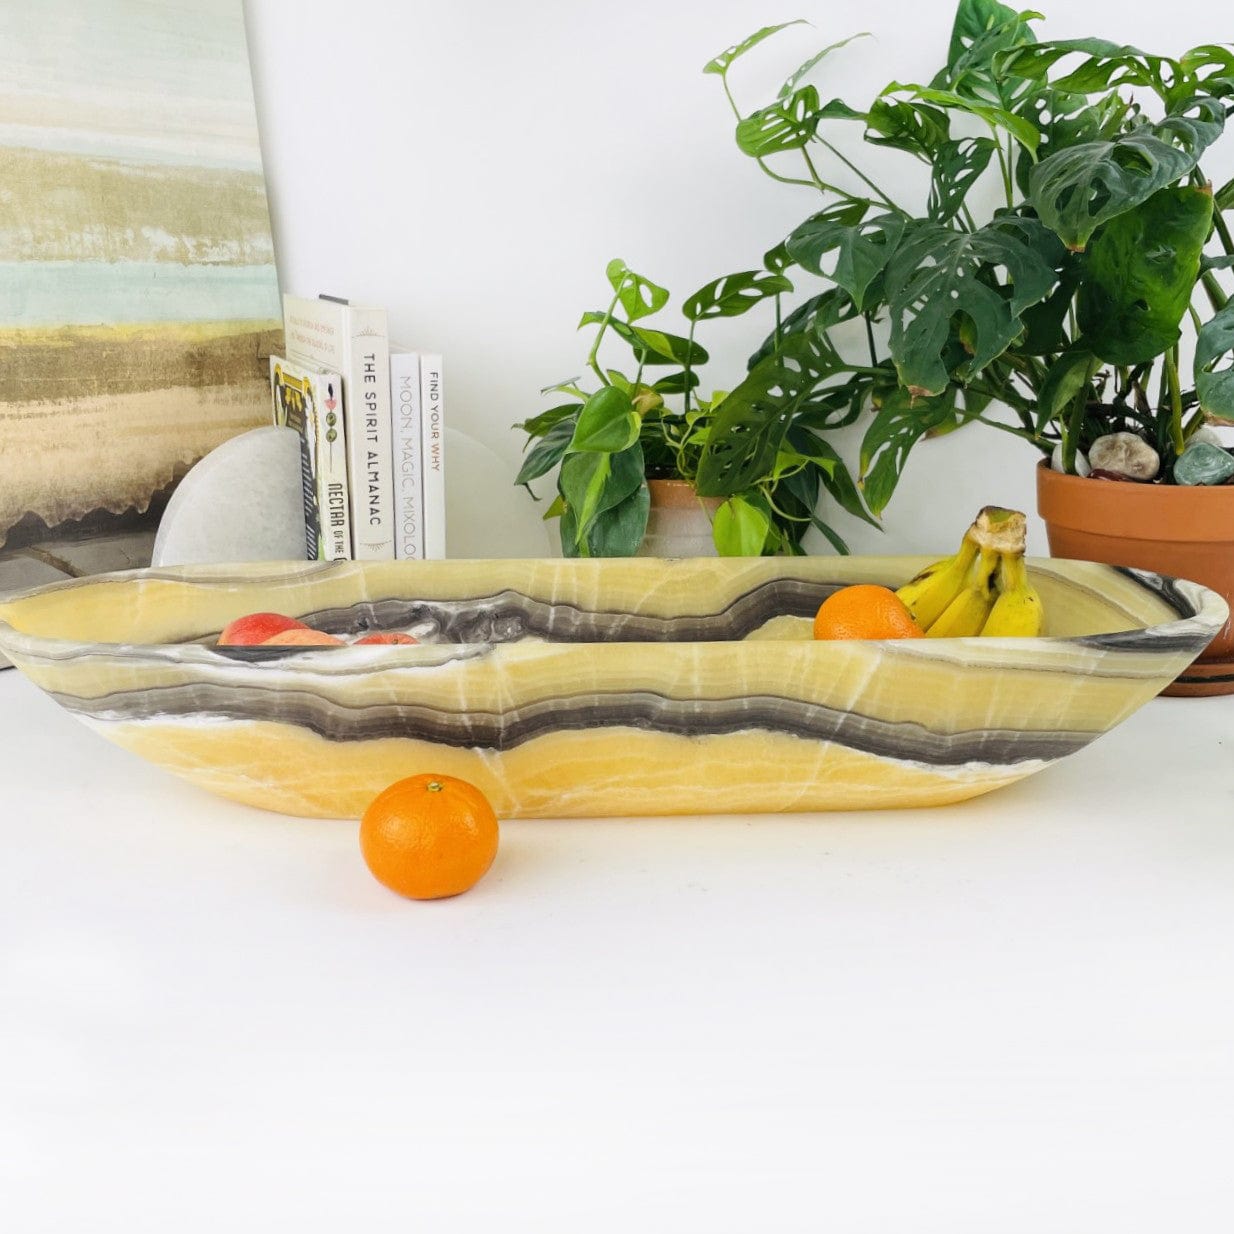 Mexican Onyx Oval Bowl with fruit inside from a side view